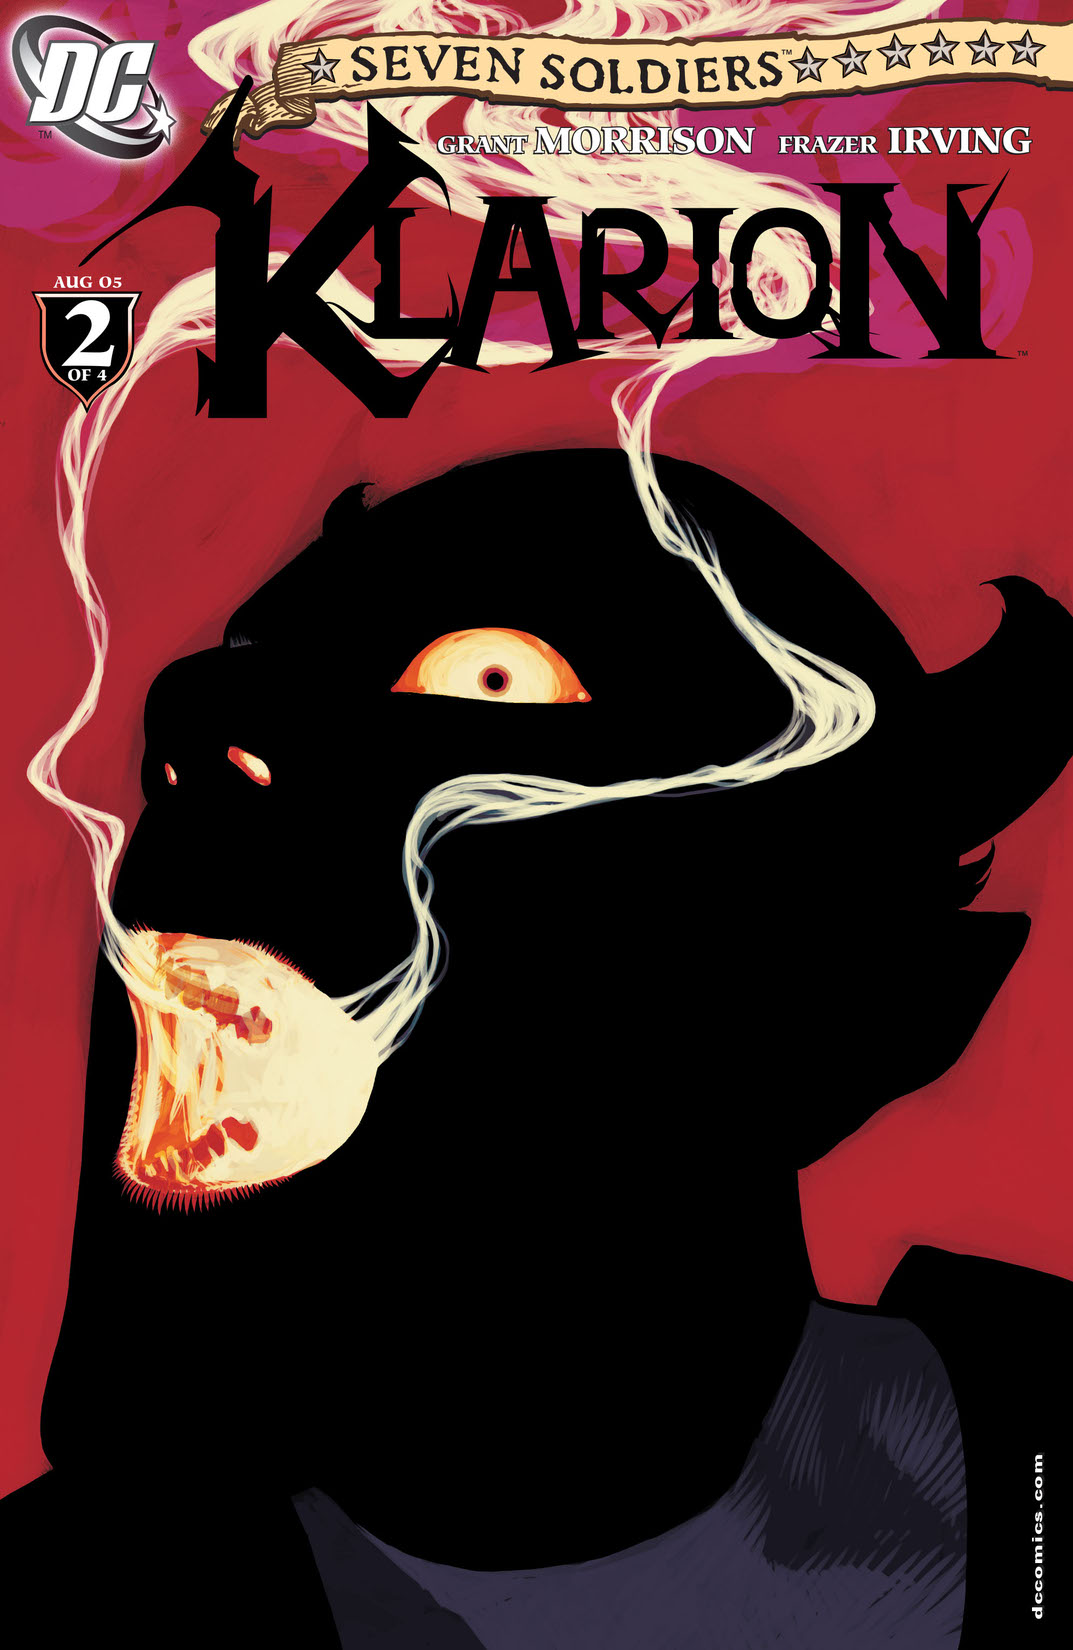 Seven Soldiers: Klarion the Witch Boy #2 preview images